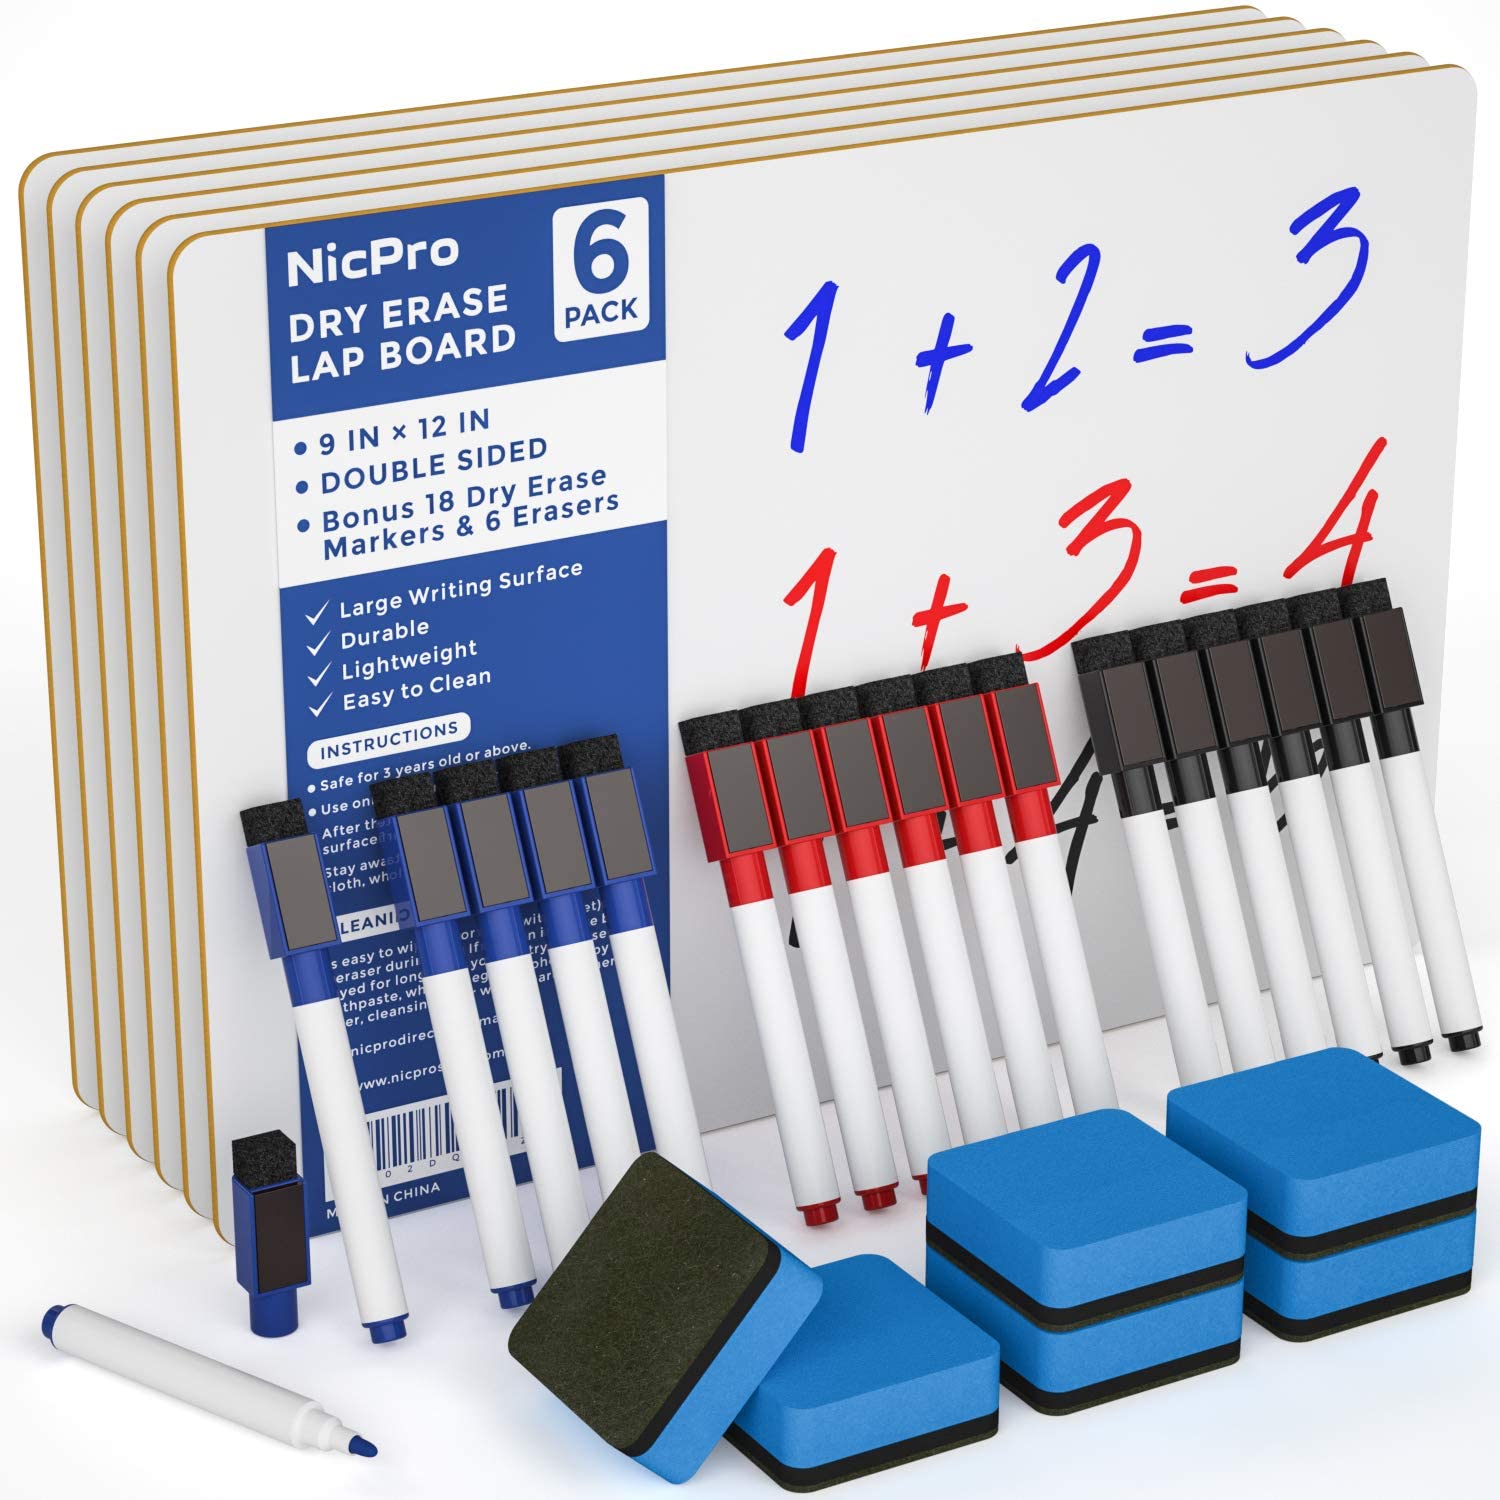 Nicpro Dry Erase Kid Whiteboard 9 x 12 Inches Double Sided Blank & Lin